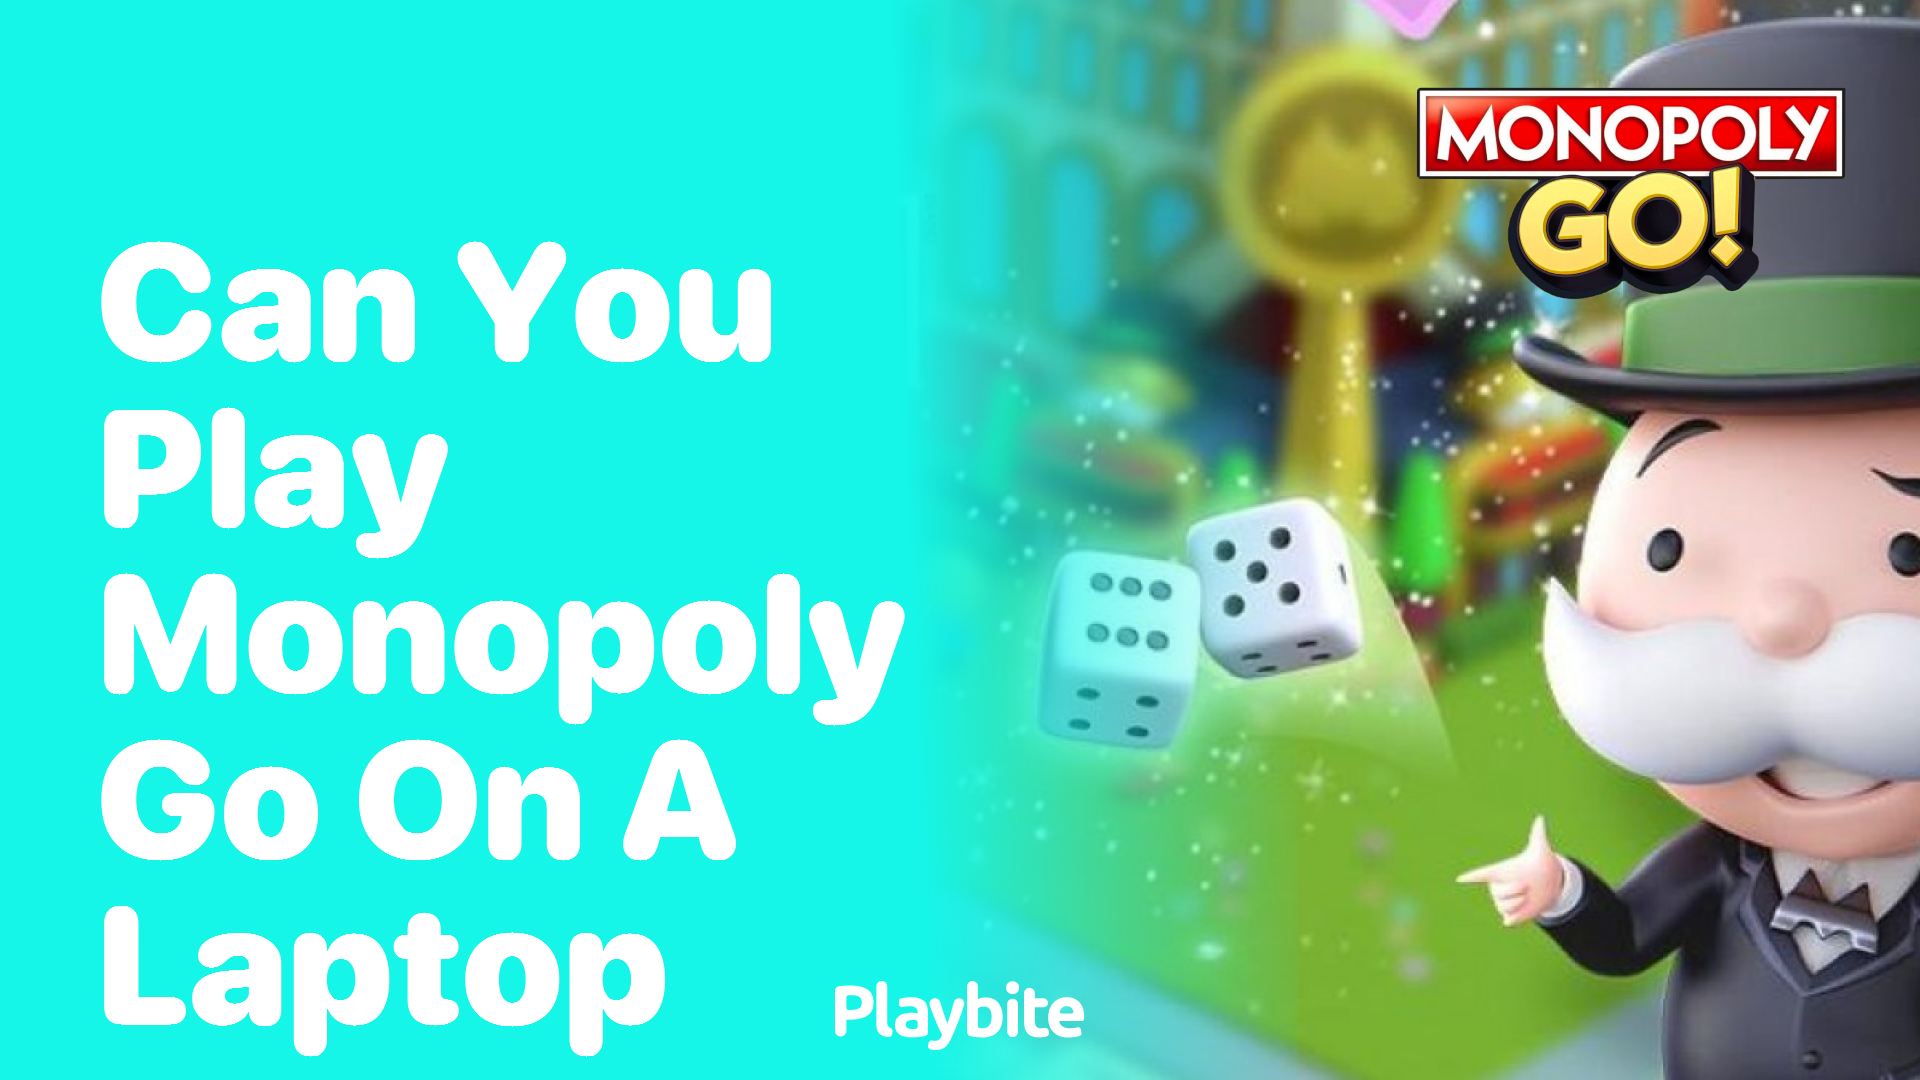 Can You Play Monopoly Go on a Laptop?